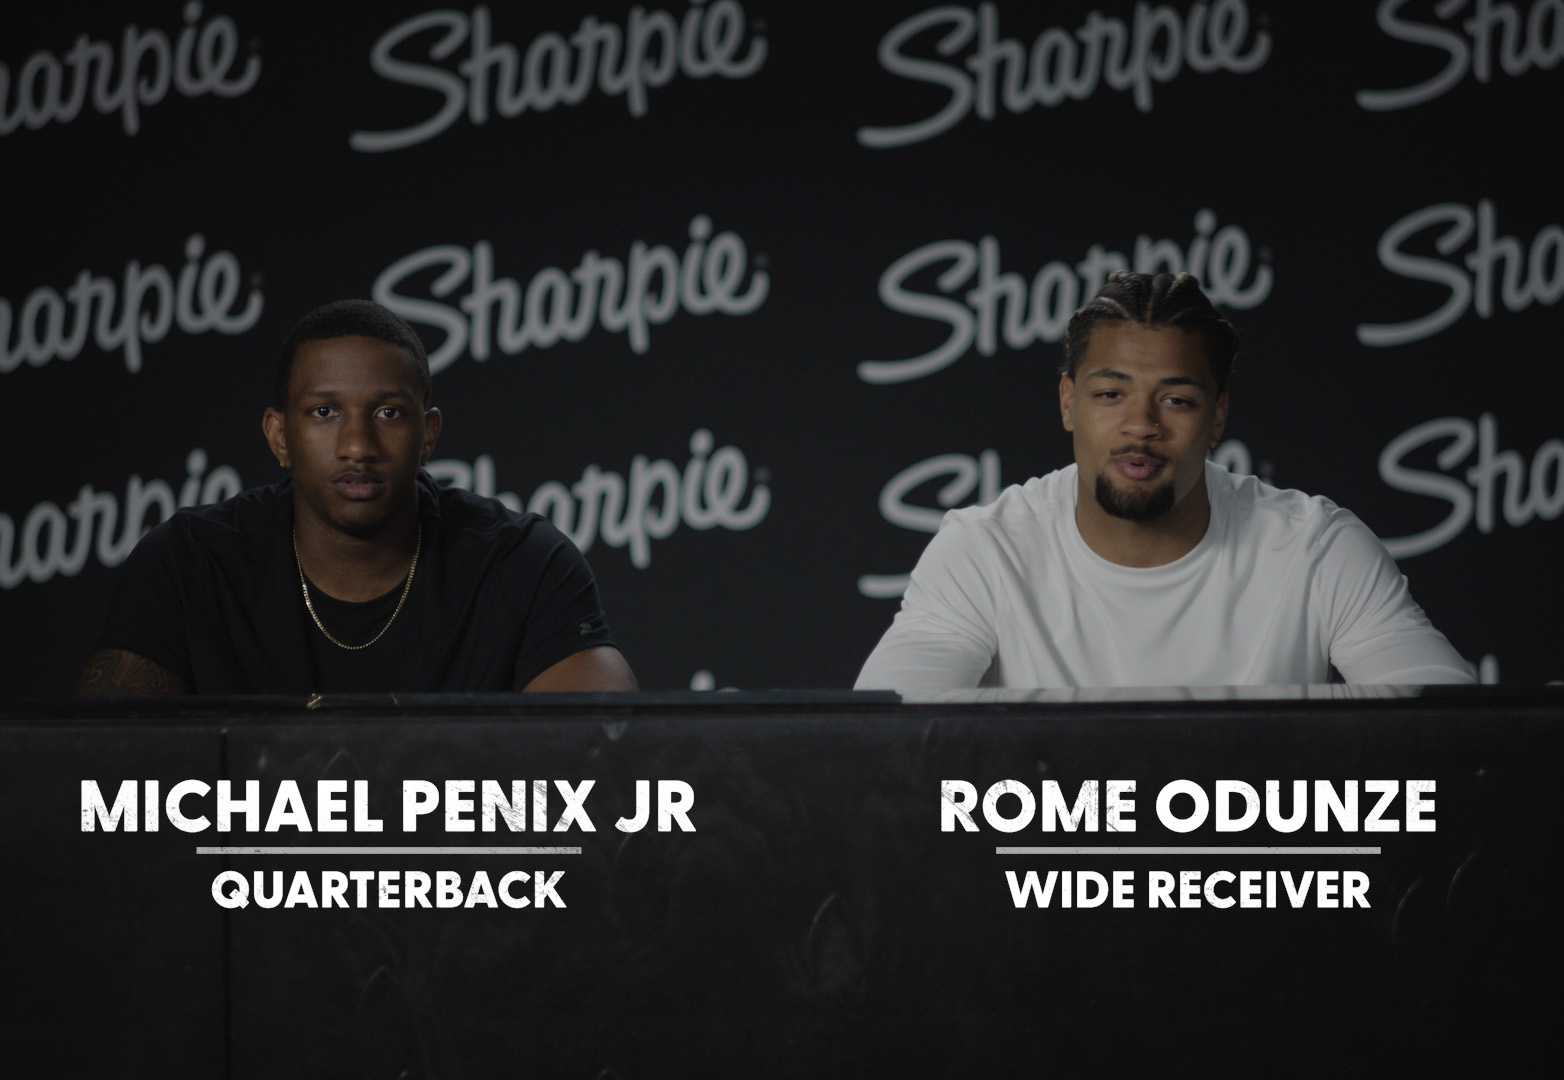 Sharpie® S-Gel Pens Put Rookies of the Year, Michael Penix Jr. and Rome Odunze, Through a Signature Combine to Train for Signing their Pro Contracts